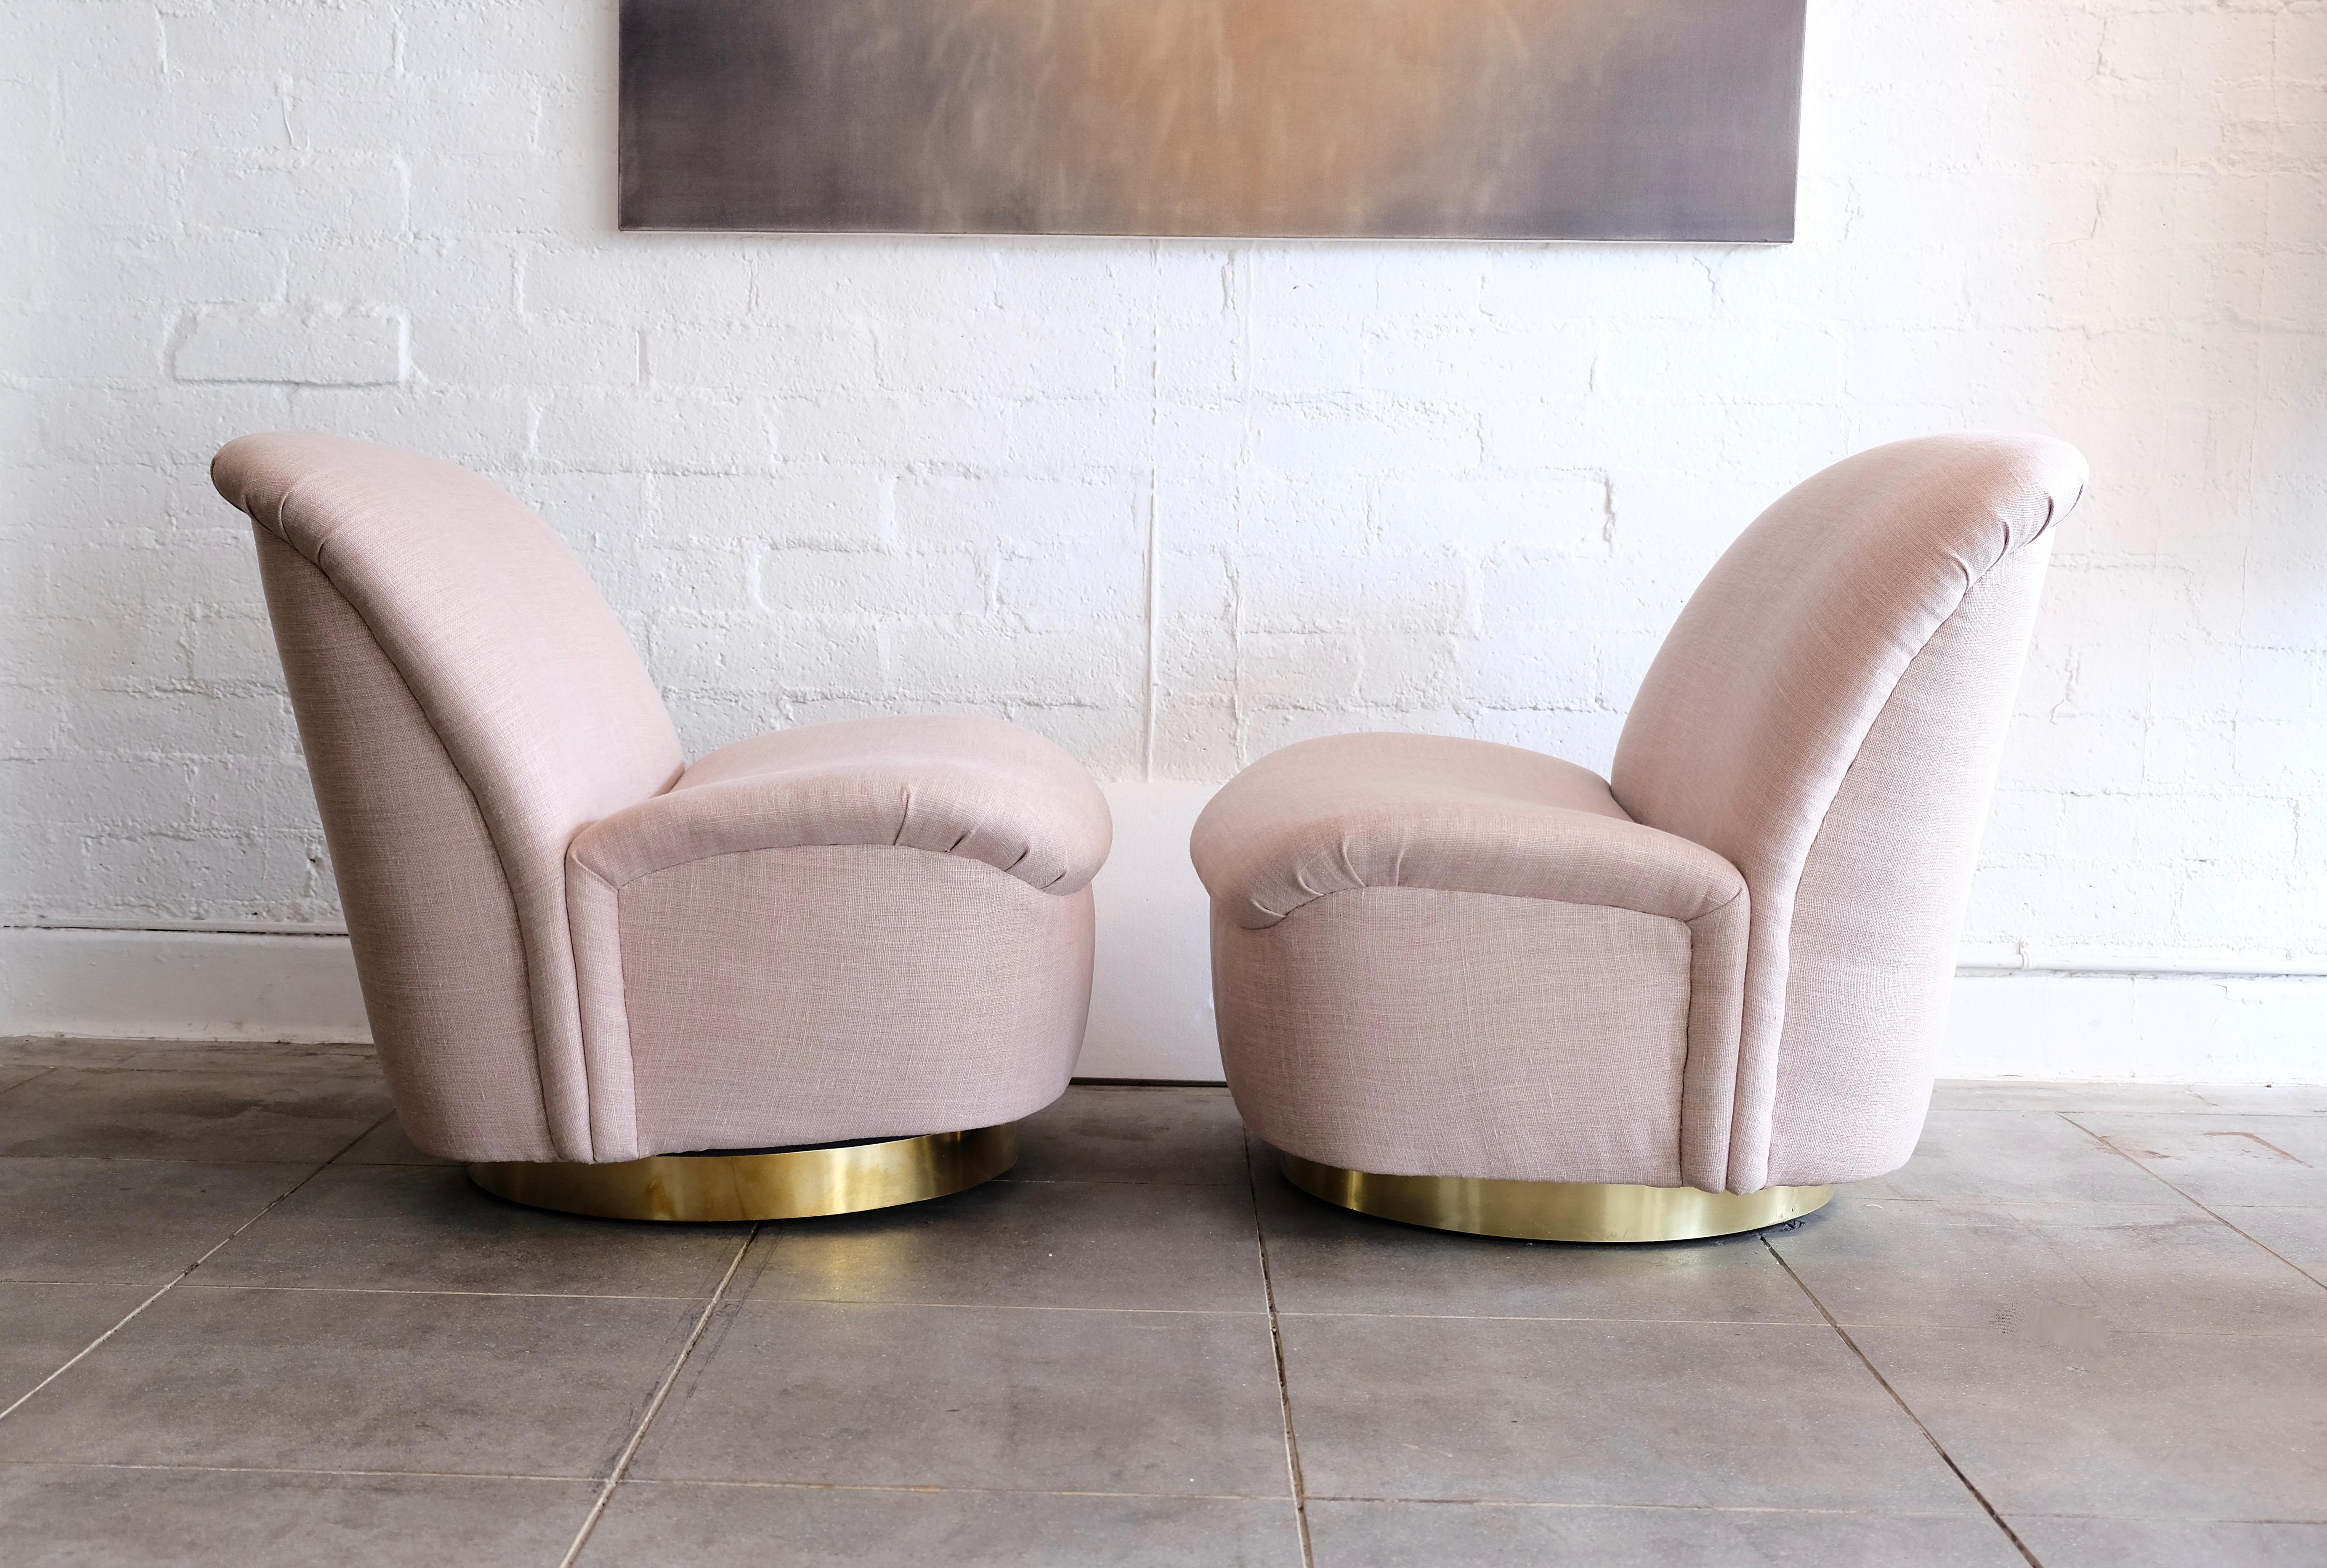 These pair of slipper chairs by Directional tilt and swivel on their brass base. The chairs have been freshly recovered in a pale blush pink fabric. The brass base is new since the original base was covered in the old fabric.